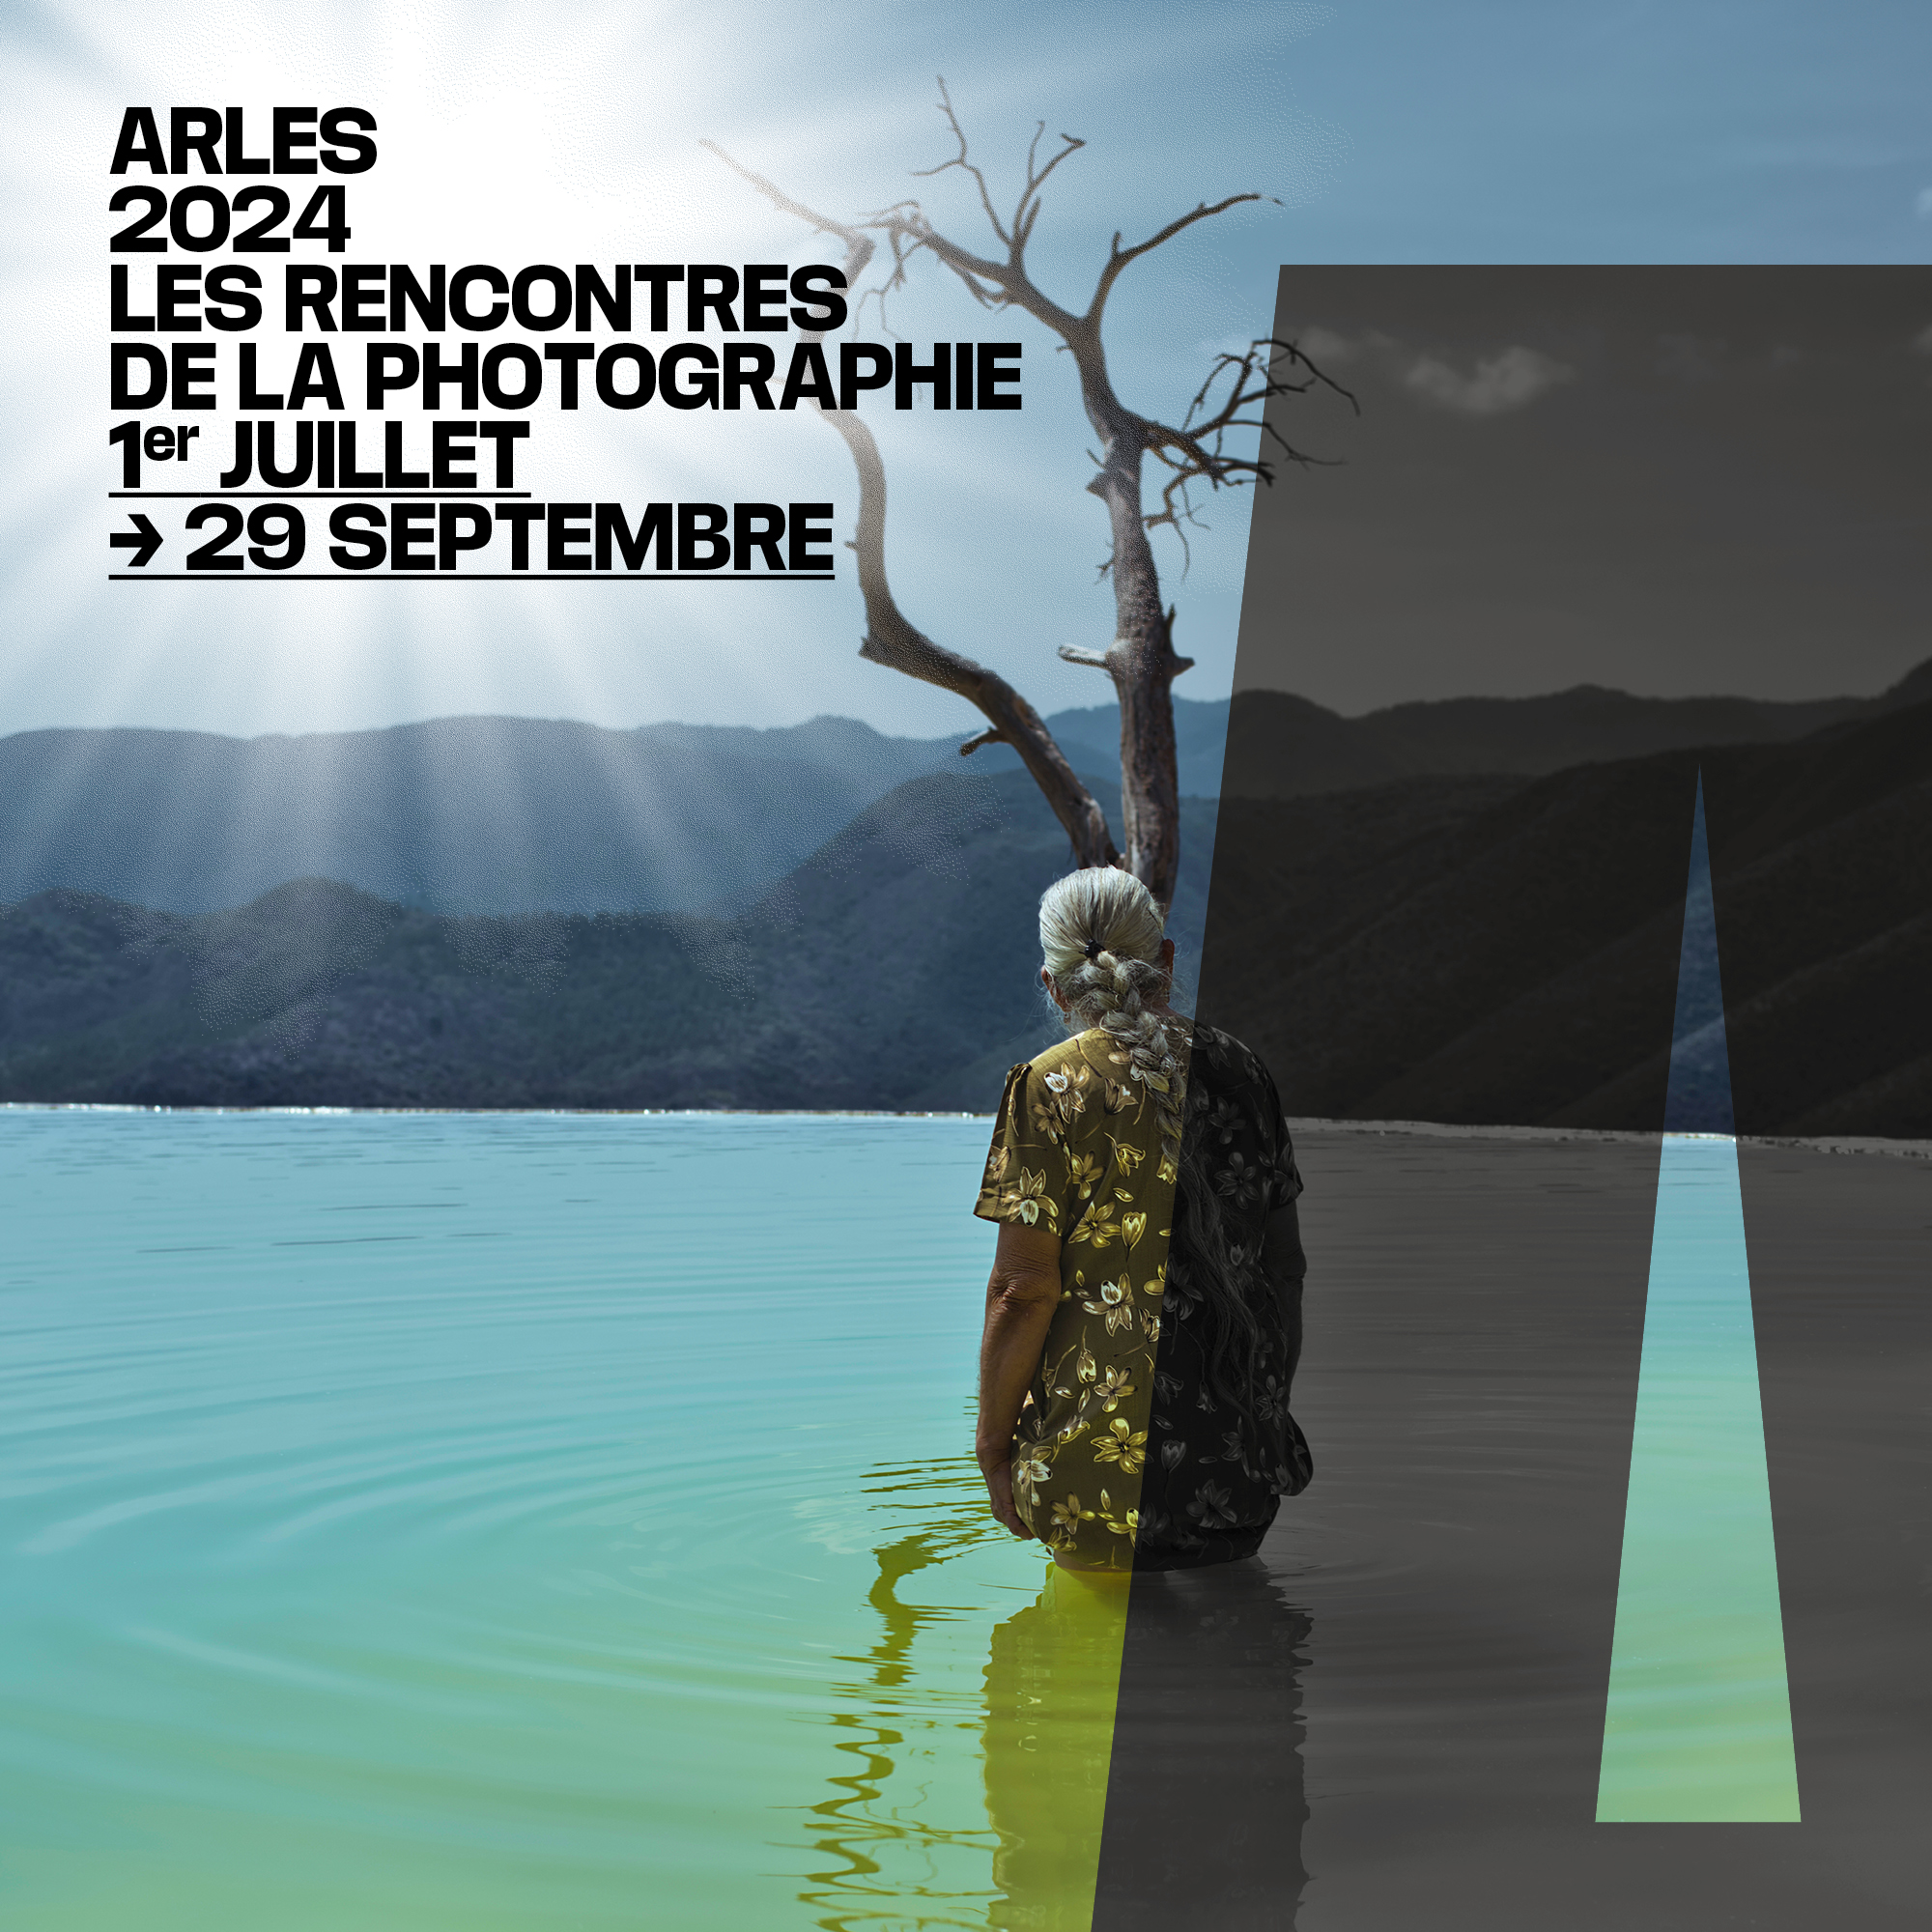 DISCOVER THE POSTER OF THE RENCONTRES D'ARLES 2024 !